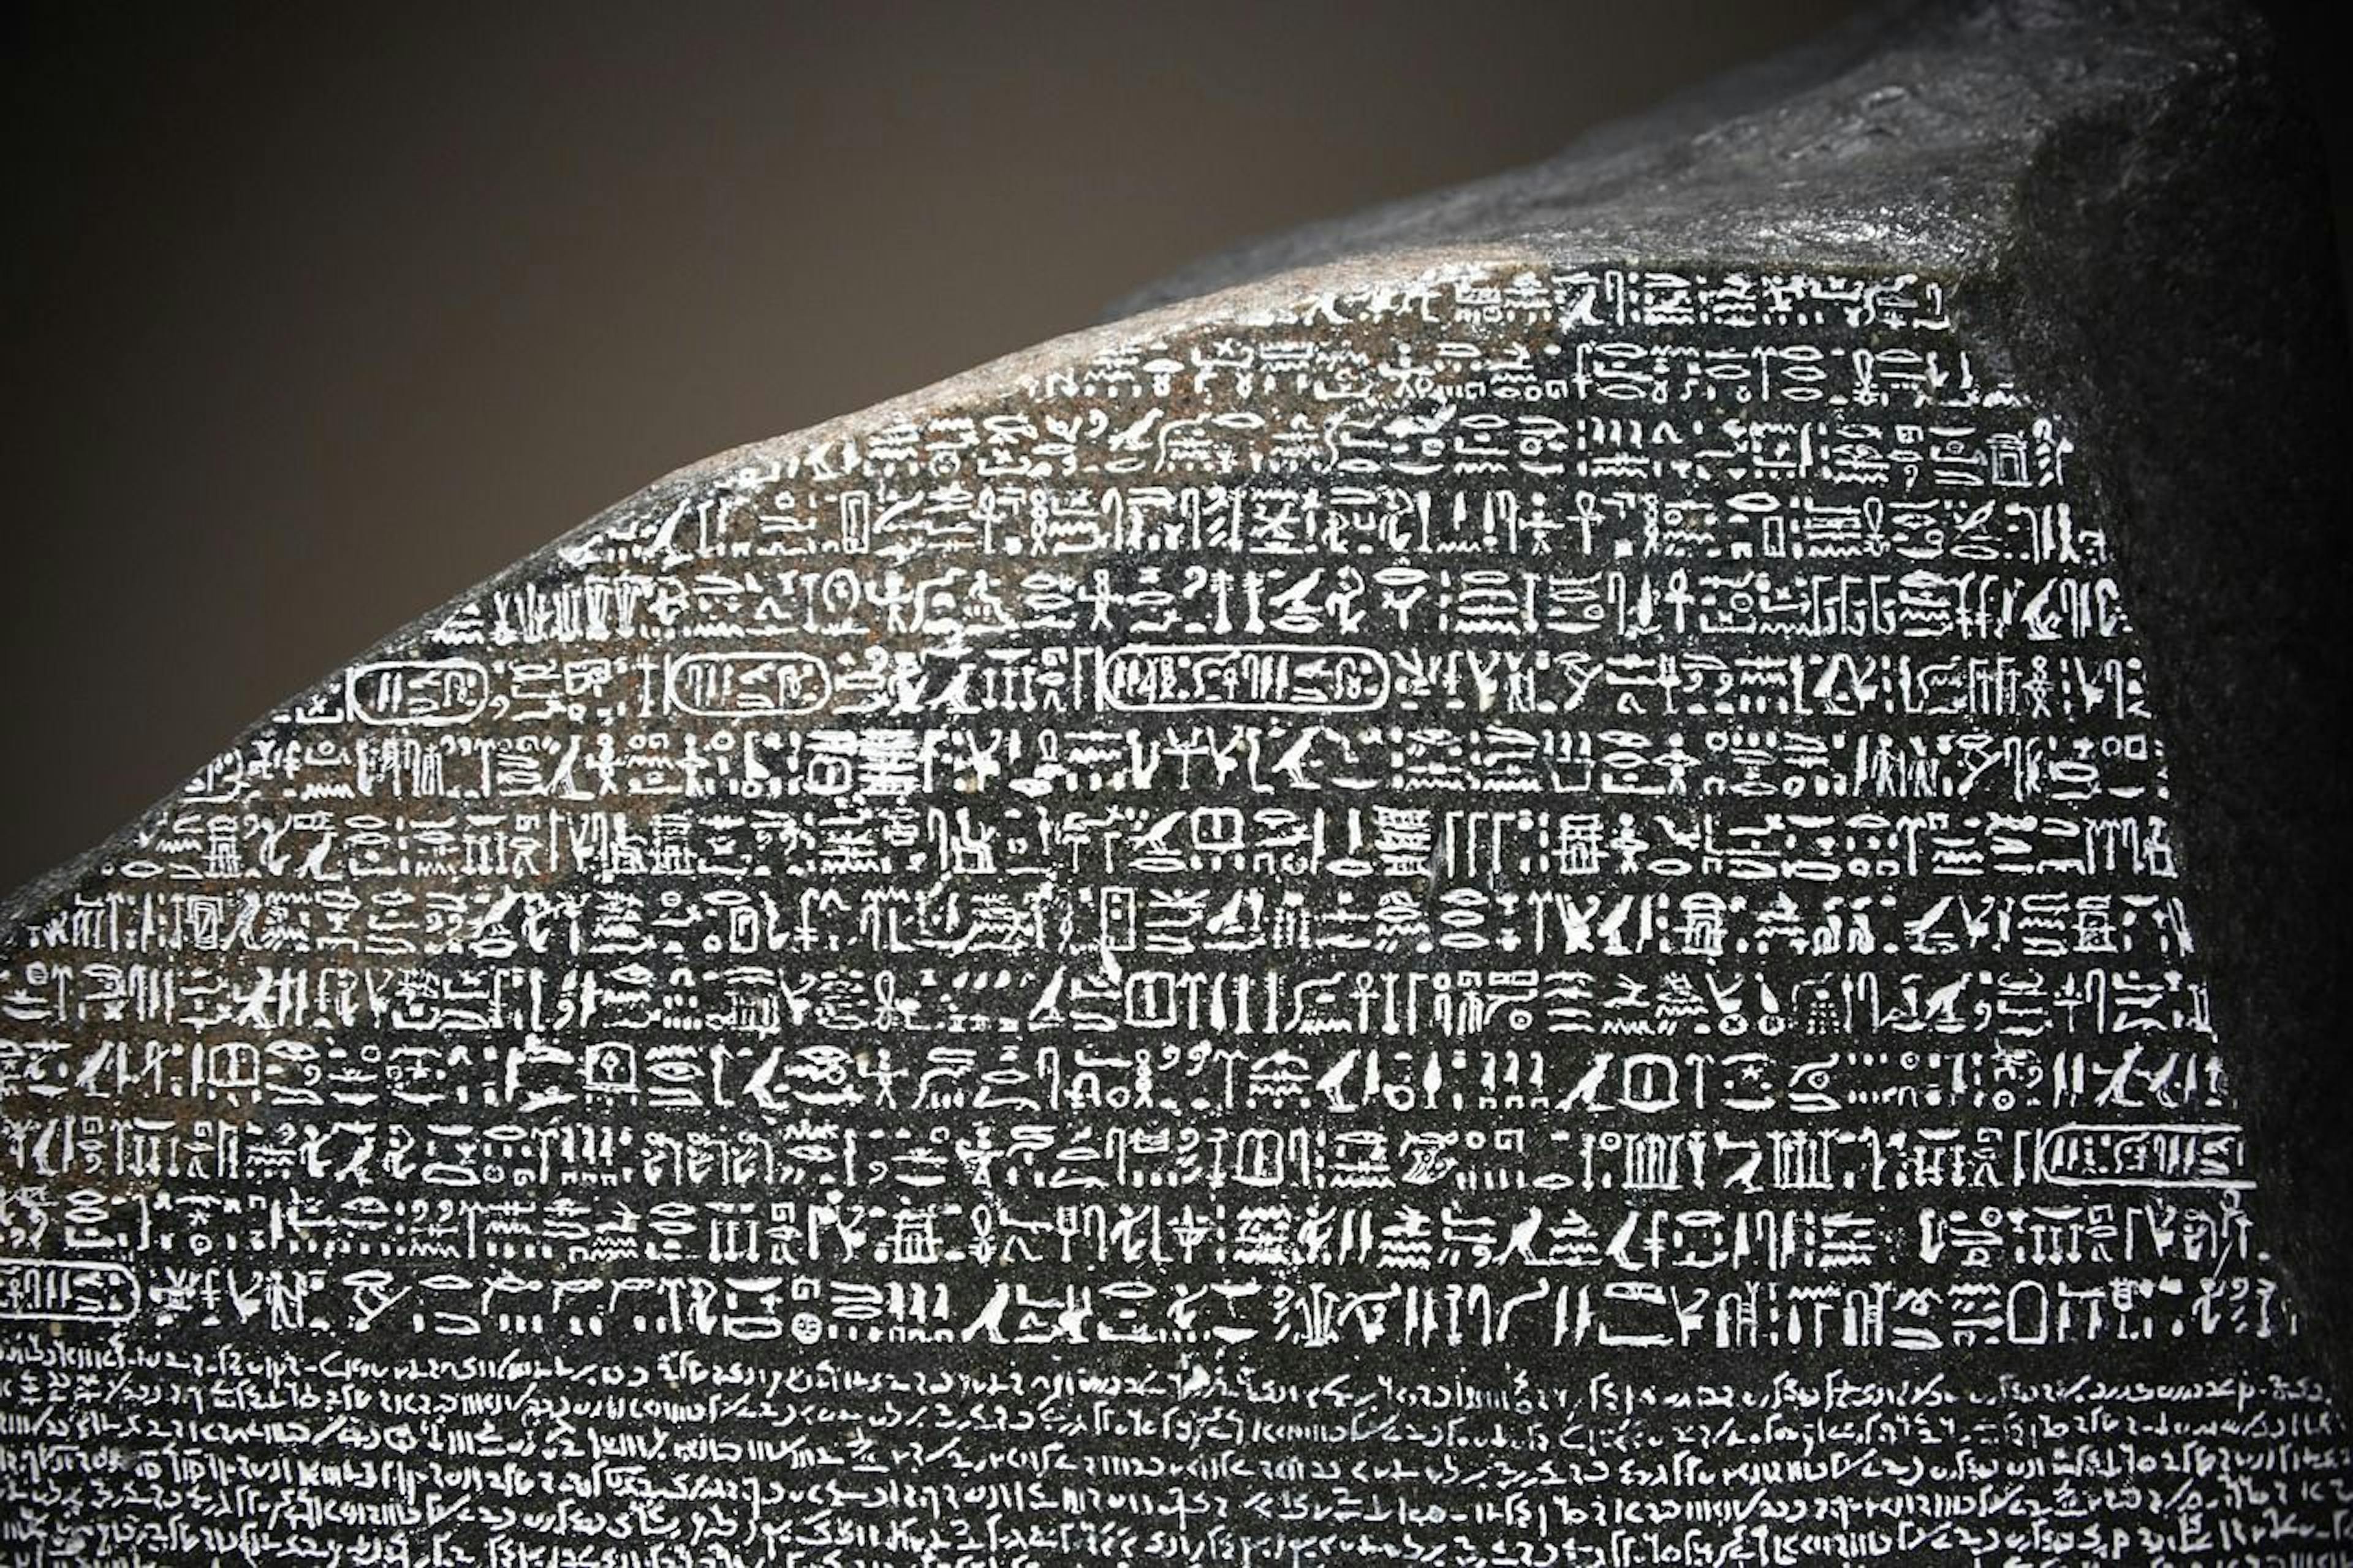 featured image - Towards a Rosetta Stone for (meta)data: Related work